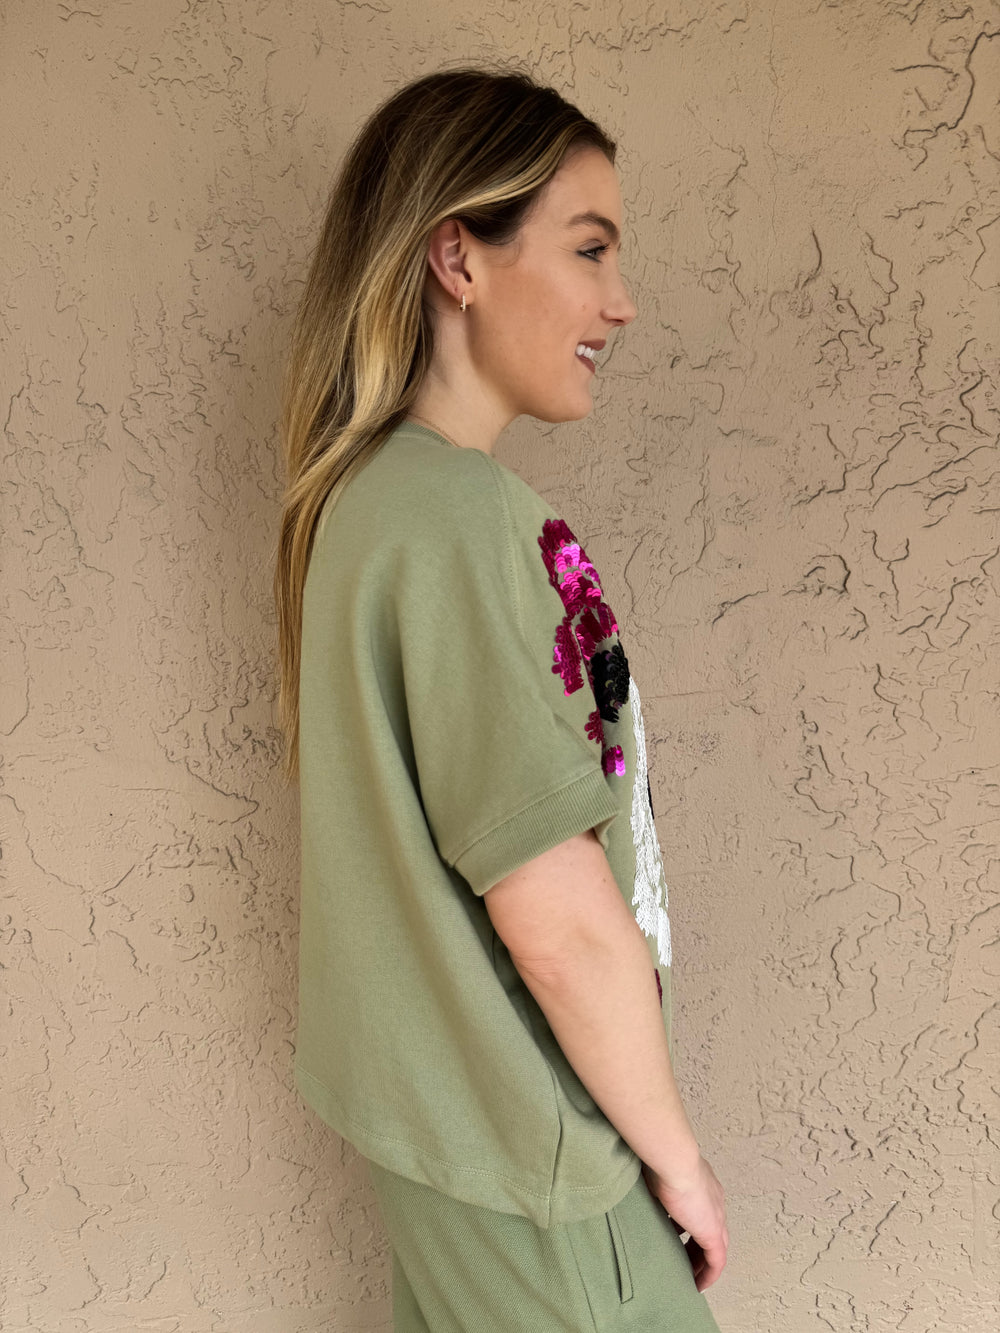 Floraly Embroidered Sweatshirt